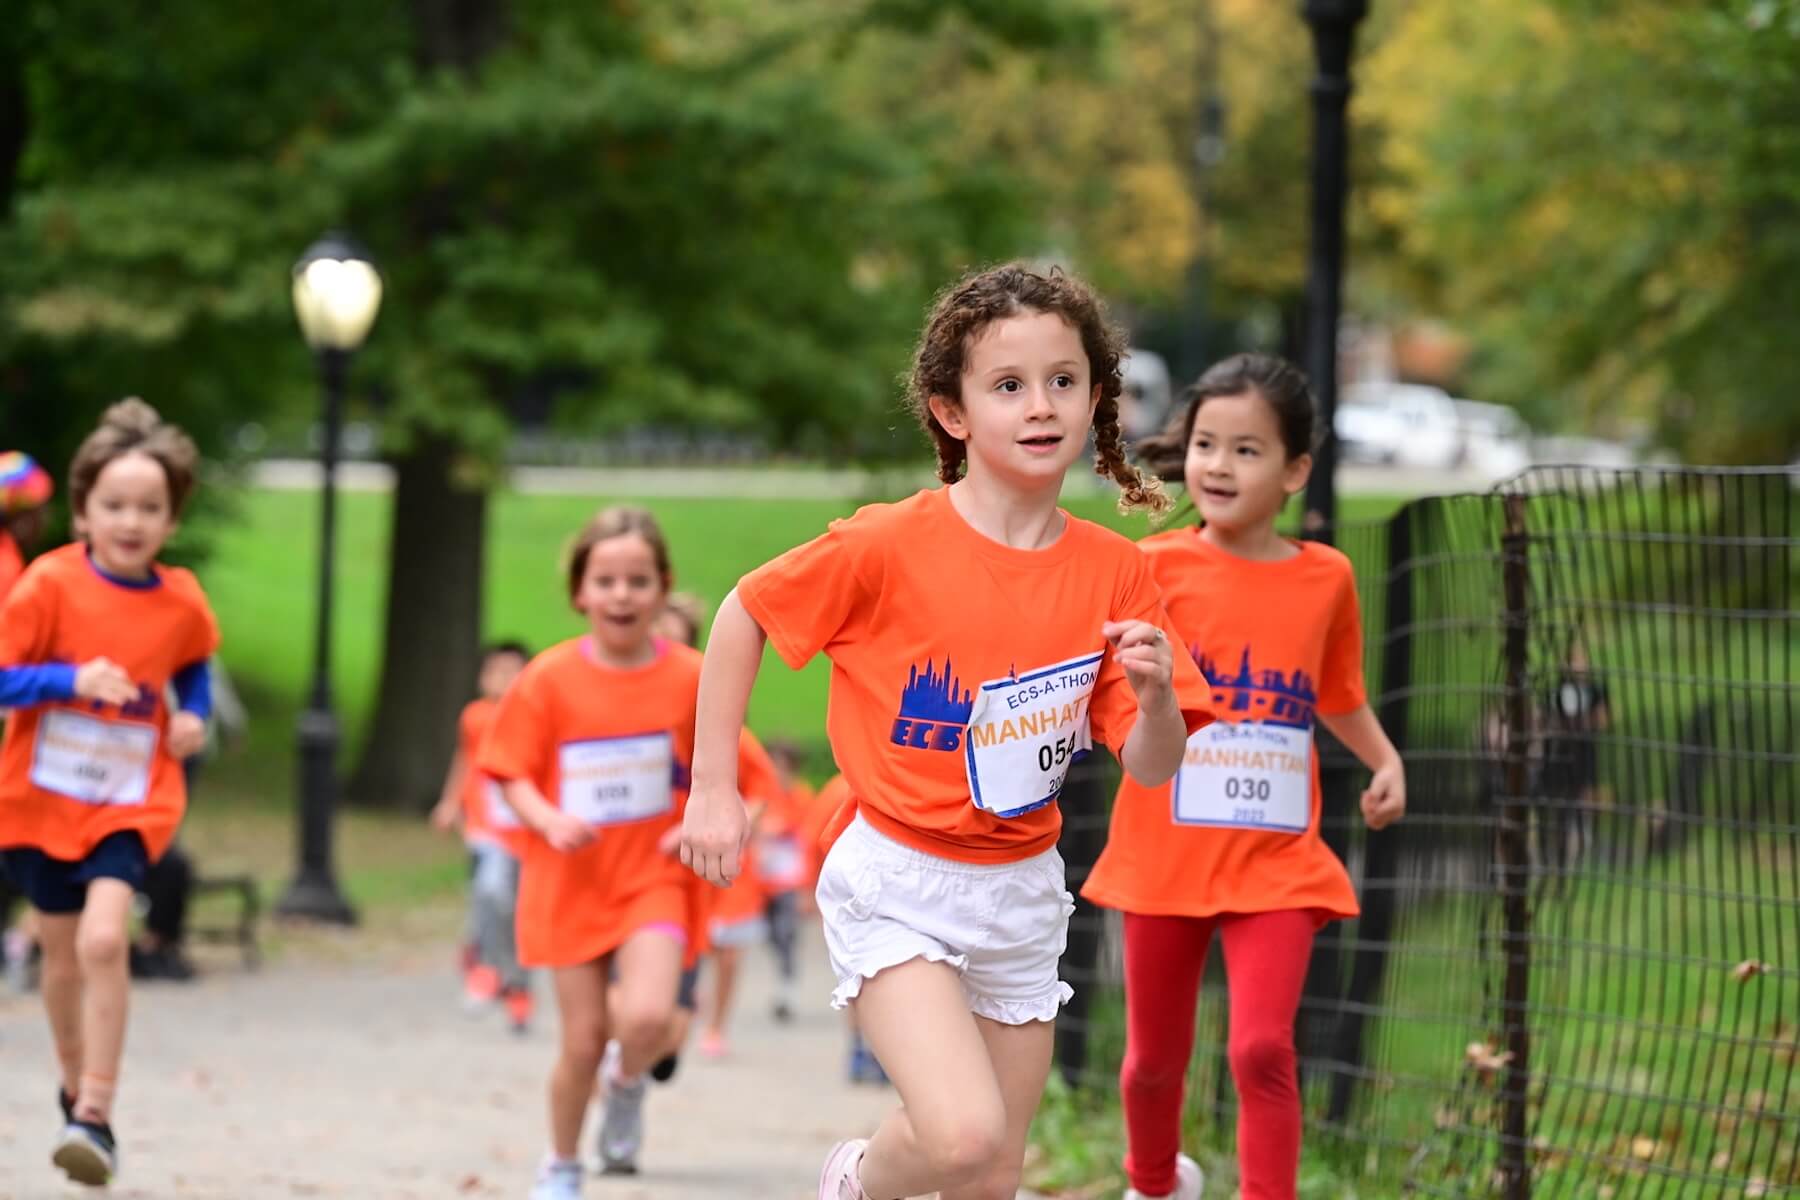 Ethical Culture Fieldston School_Feel Good Photos_Ethical Culture students running in central park during ECS-a-thon